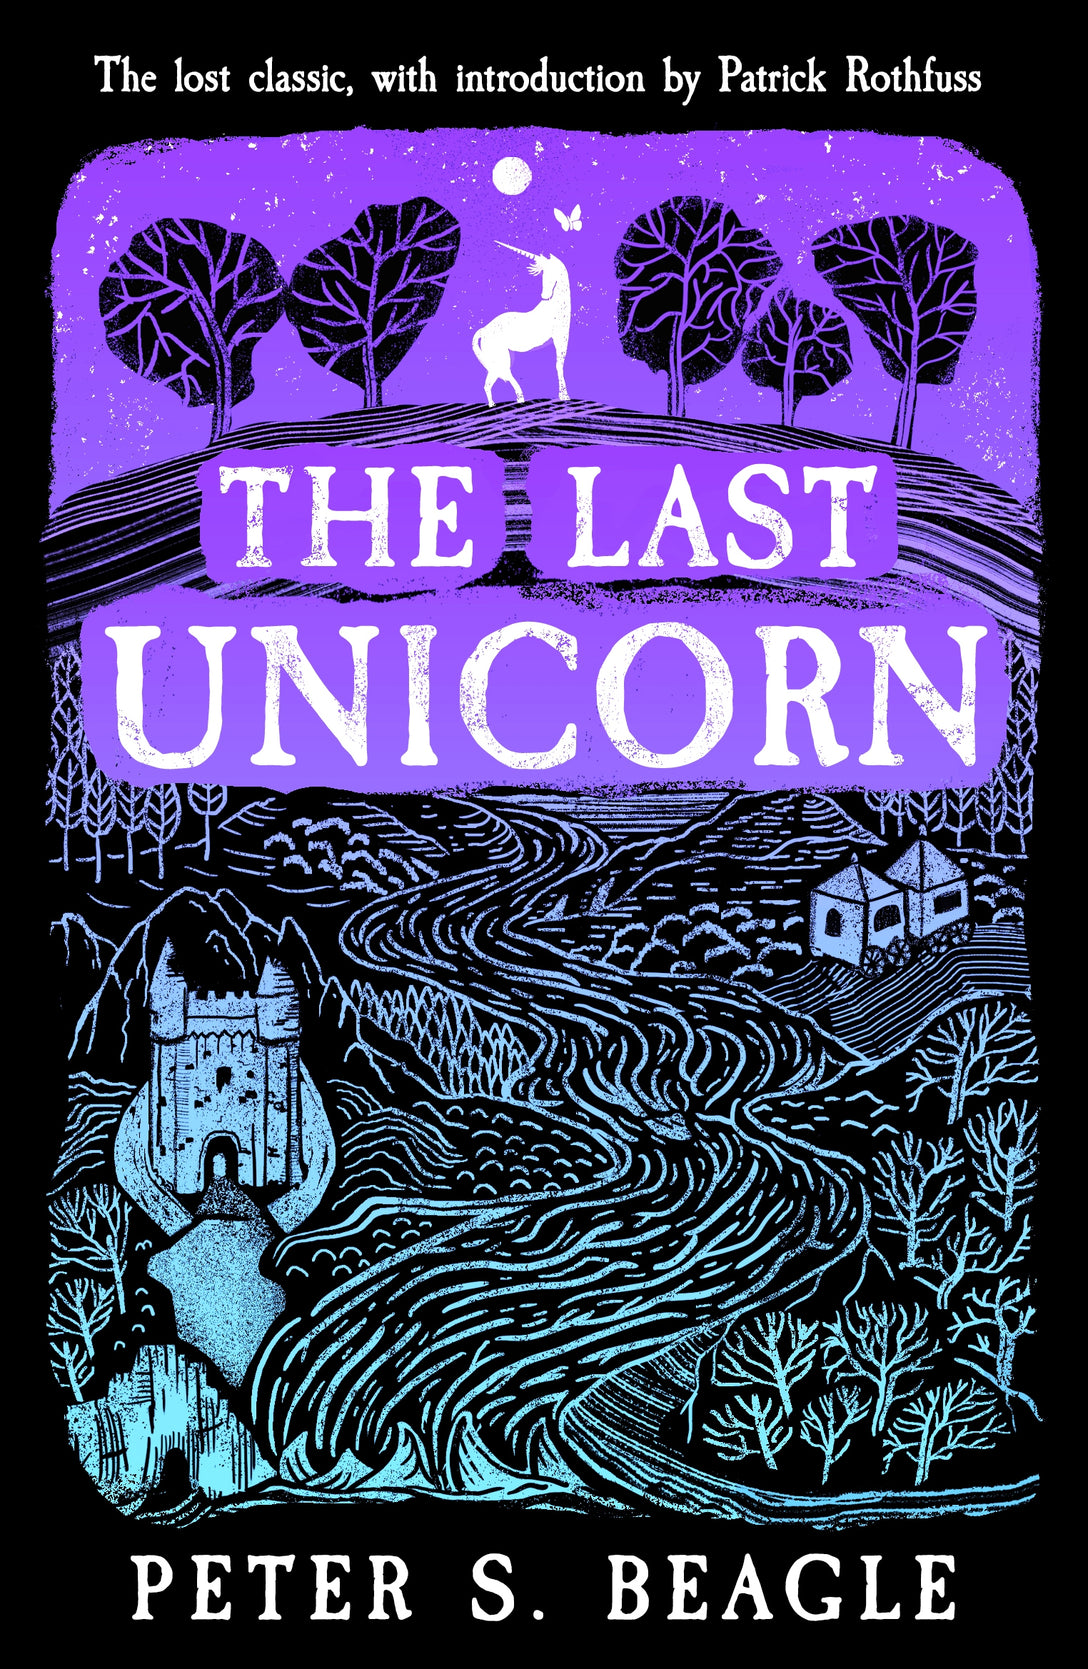 The Last Unicorn by Peter S. Beagle